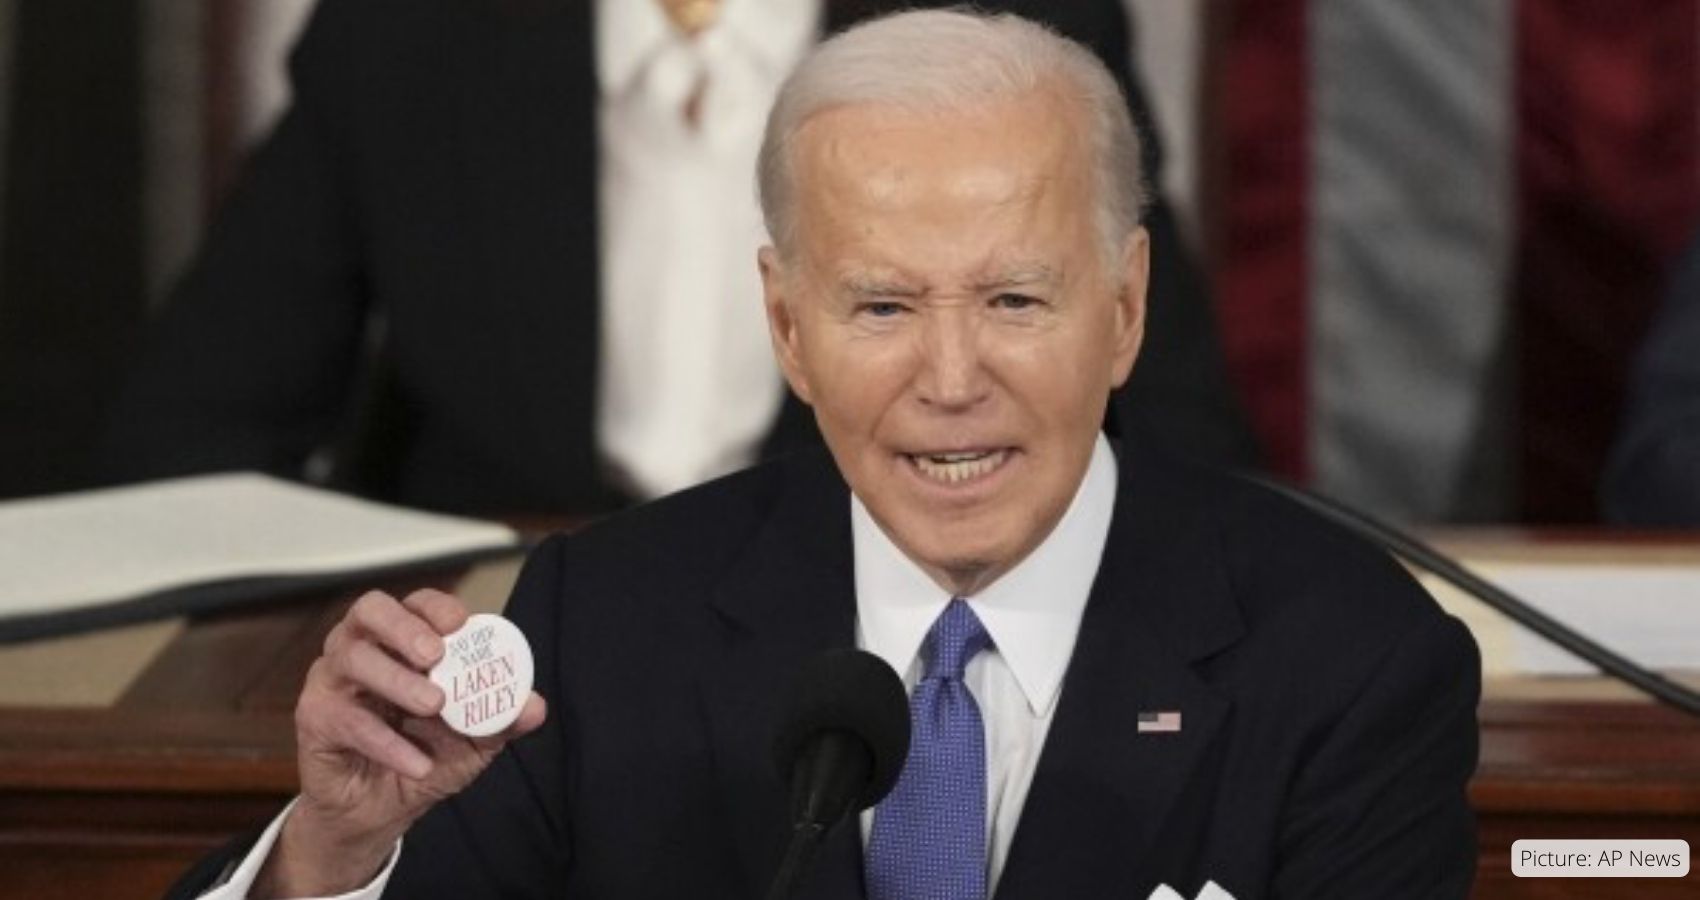 Feature and Cover President Biden Draws Contrasts Asserts Vision in State of the Union Address